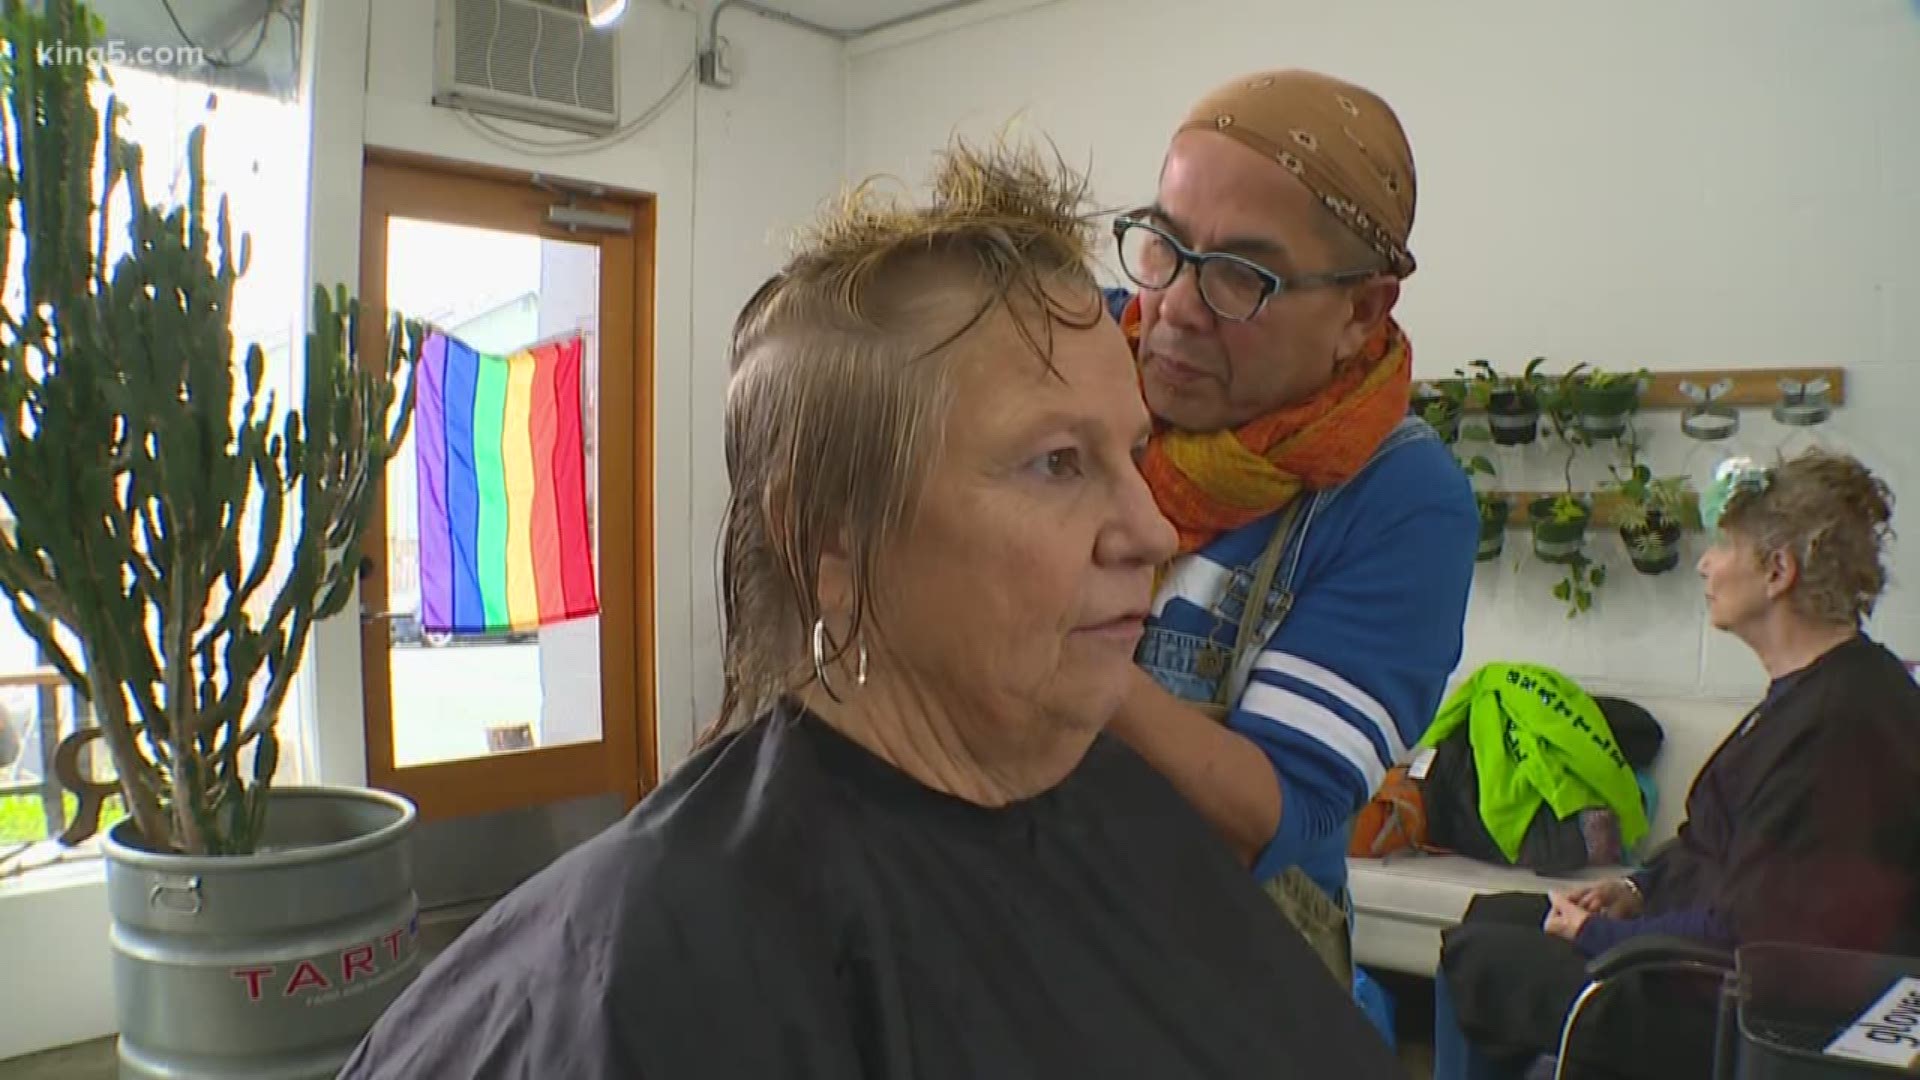 One stylist gives free haircuts to the homeless and makes food for those in need with money out of his own pocket.